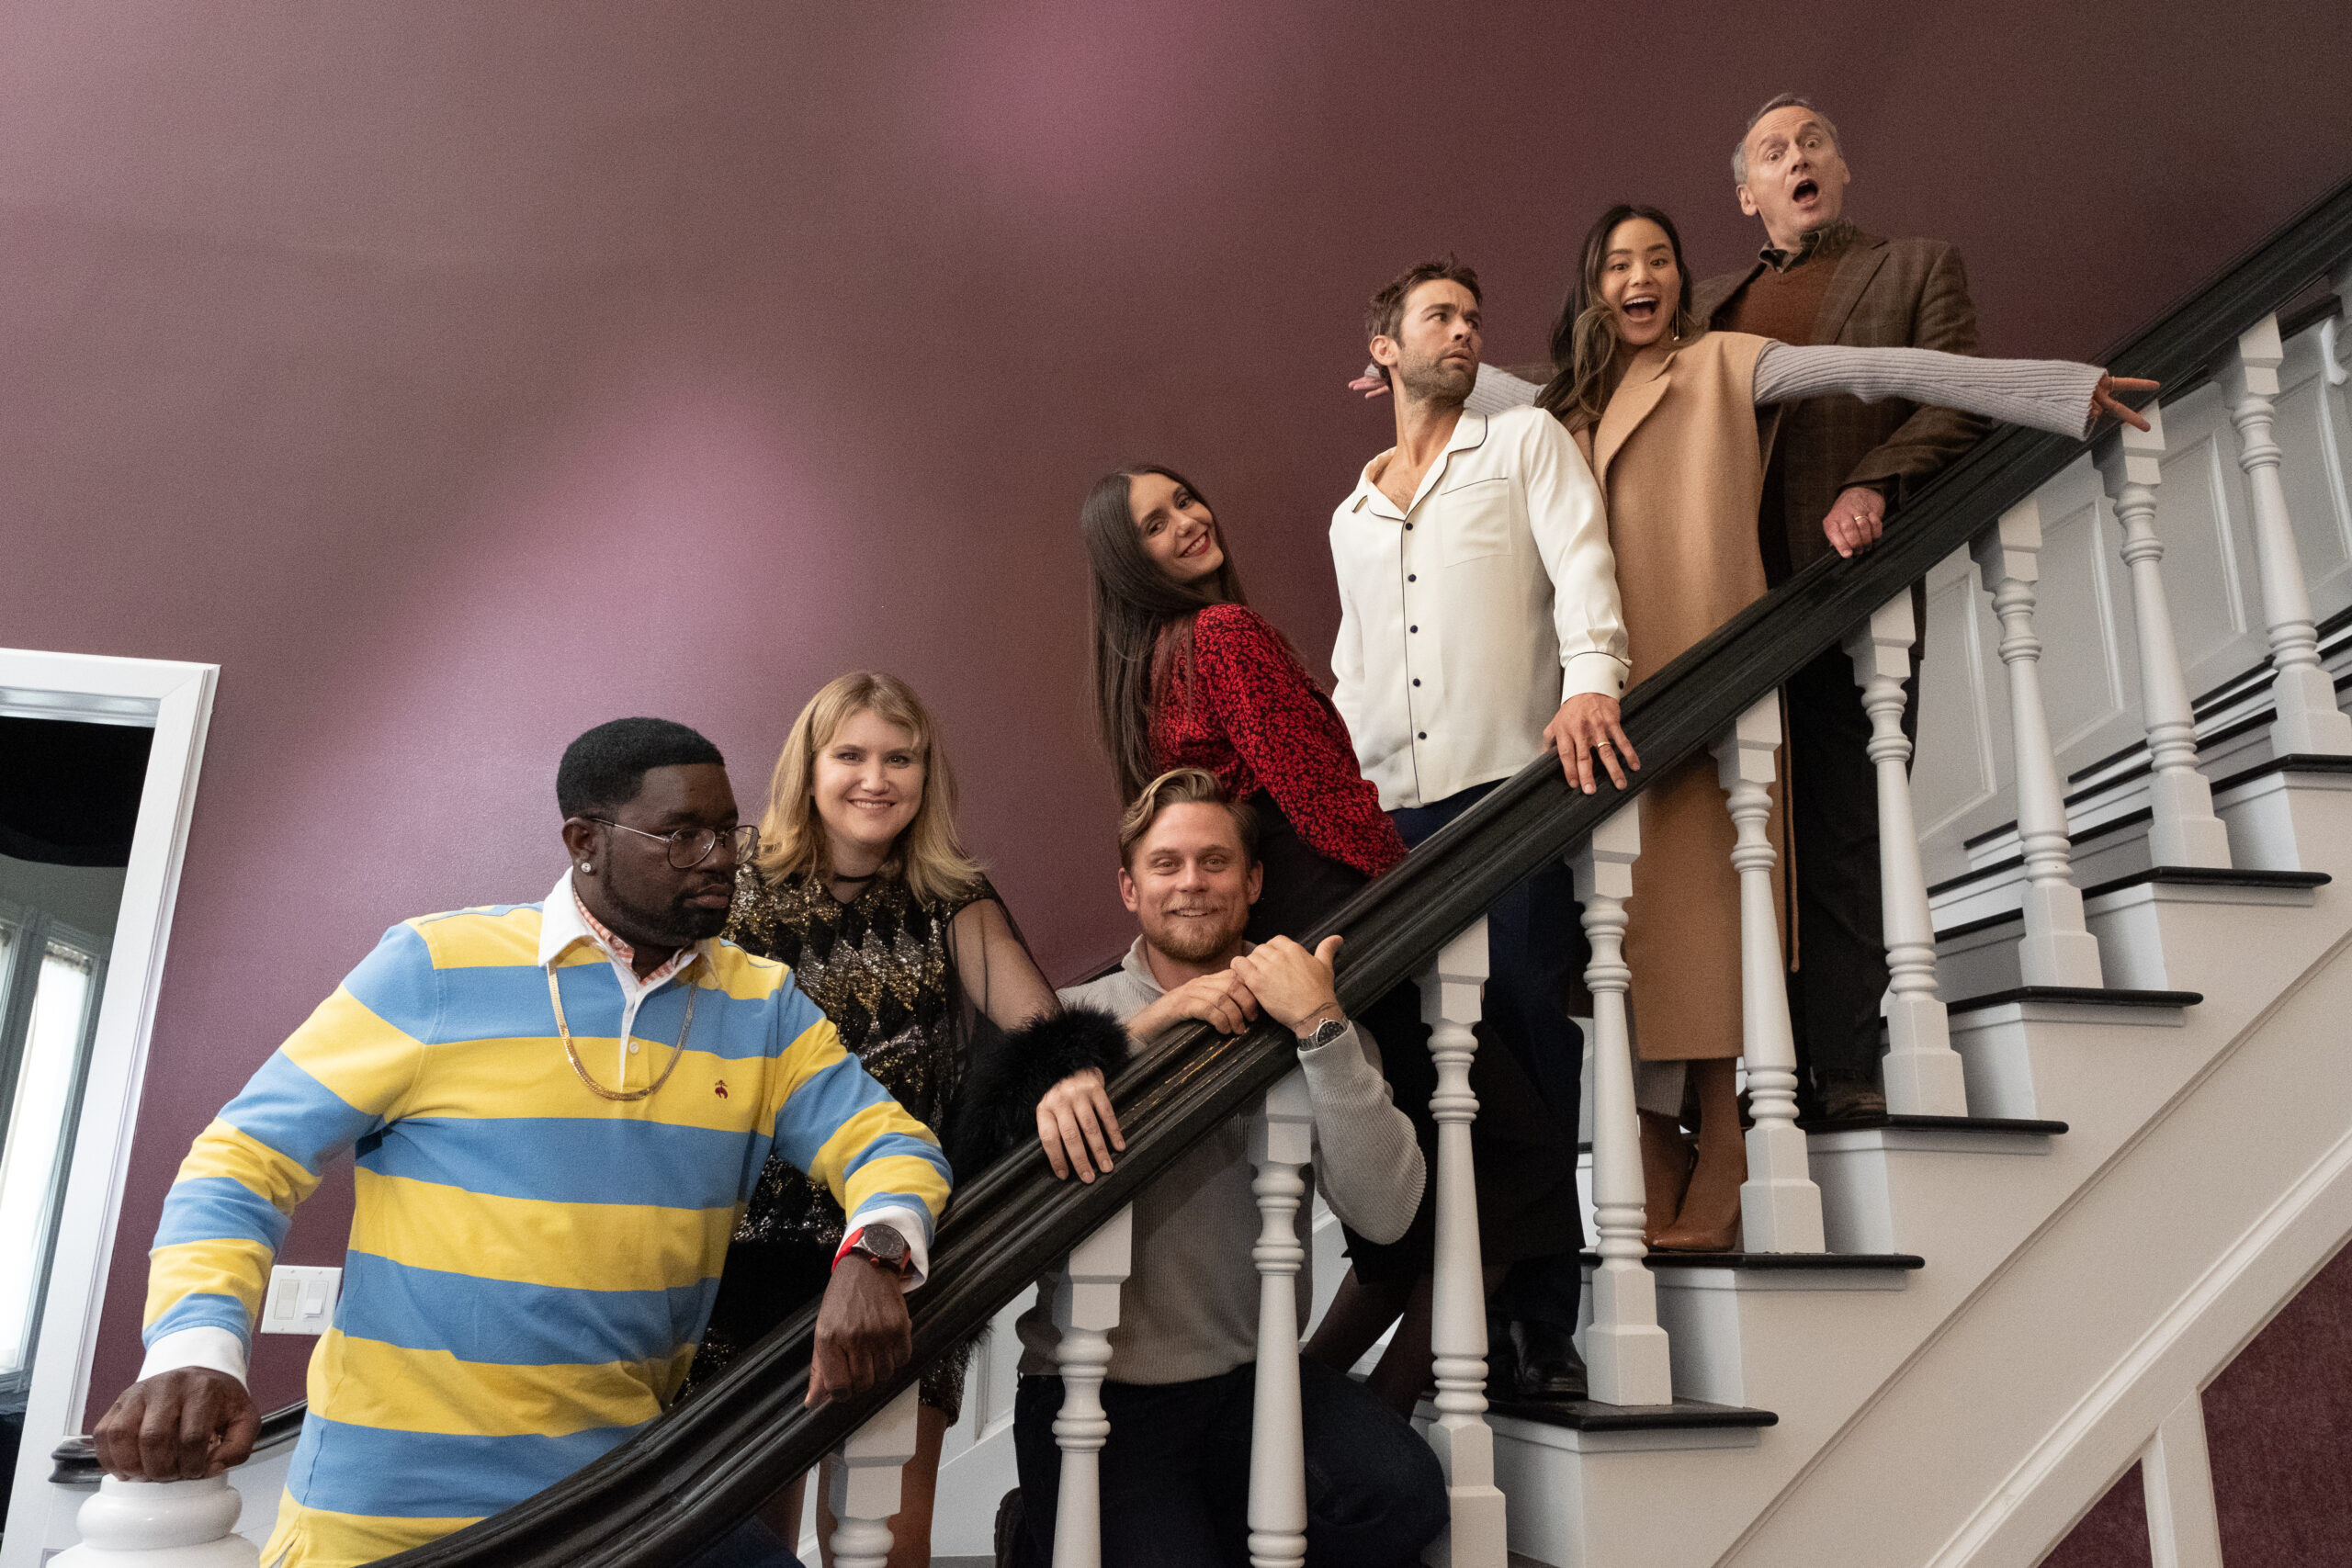 L-R: Lil Rel Howery, Jillian Bell, Billy Magnussen, Nina Dobrev, Chace Crawford, Jamie Chung, and Michael Hitchcock in a BTS shot on the set of Reunion.